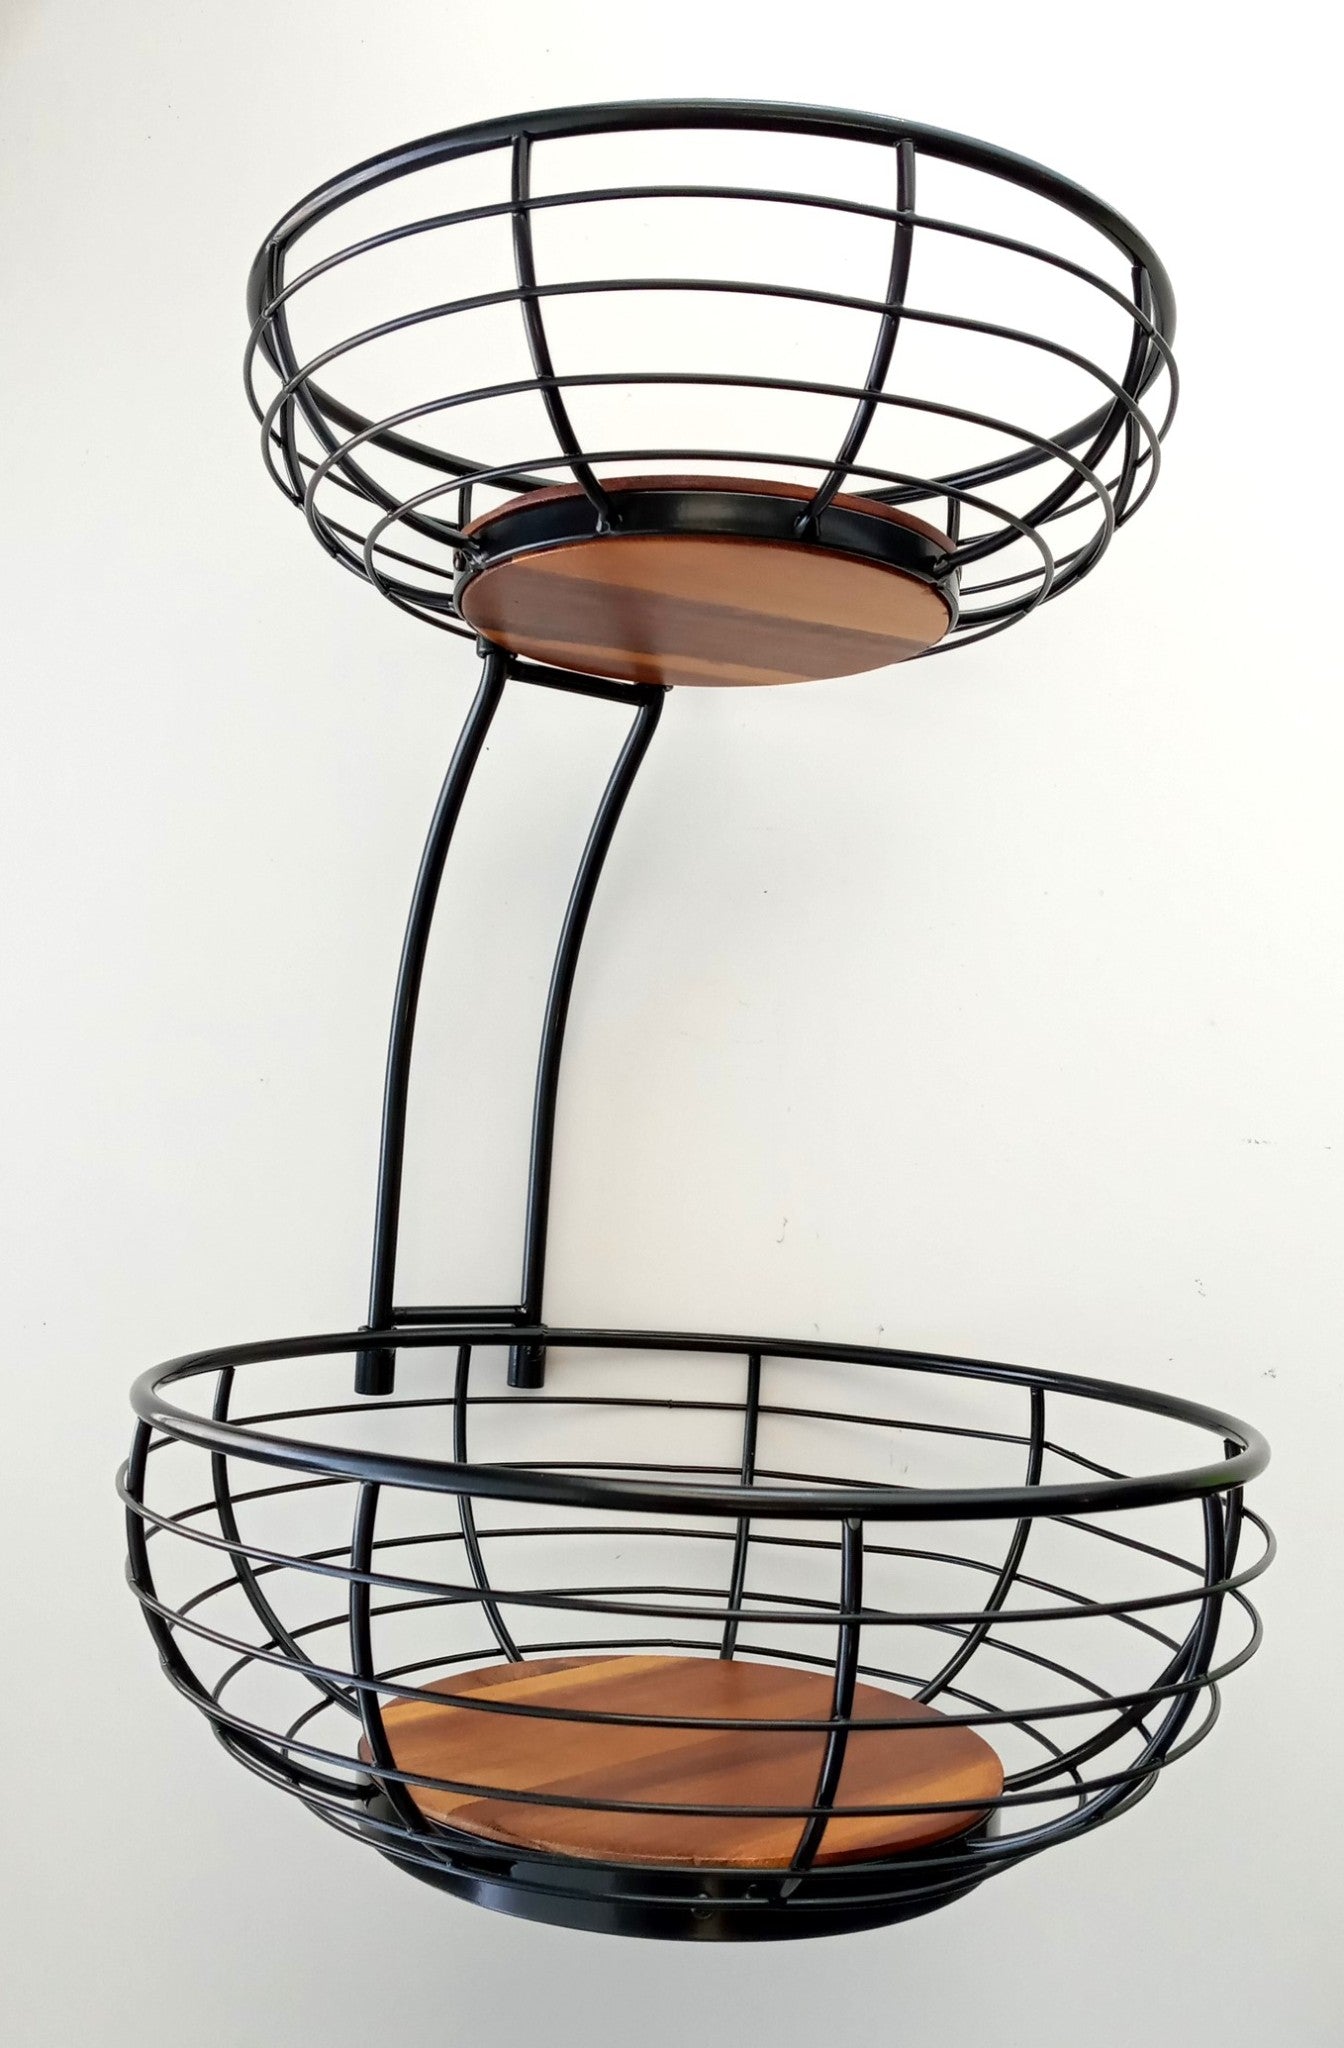 SunnyPoint Classic Tabletop 2-Tier Fruit Wire Basket Bowl Stand with Wooden Base